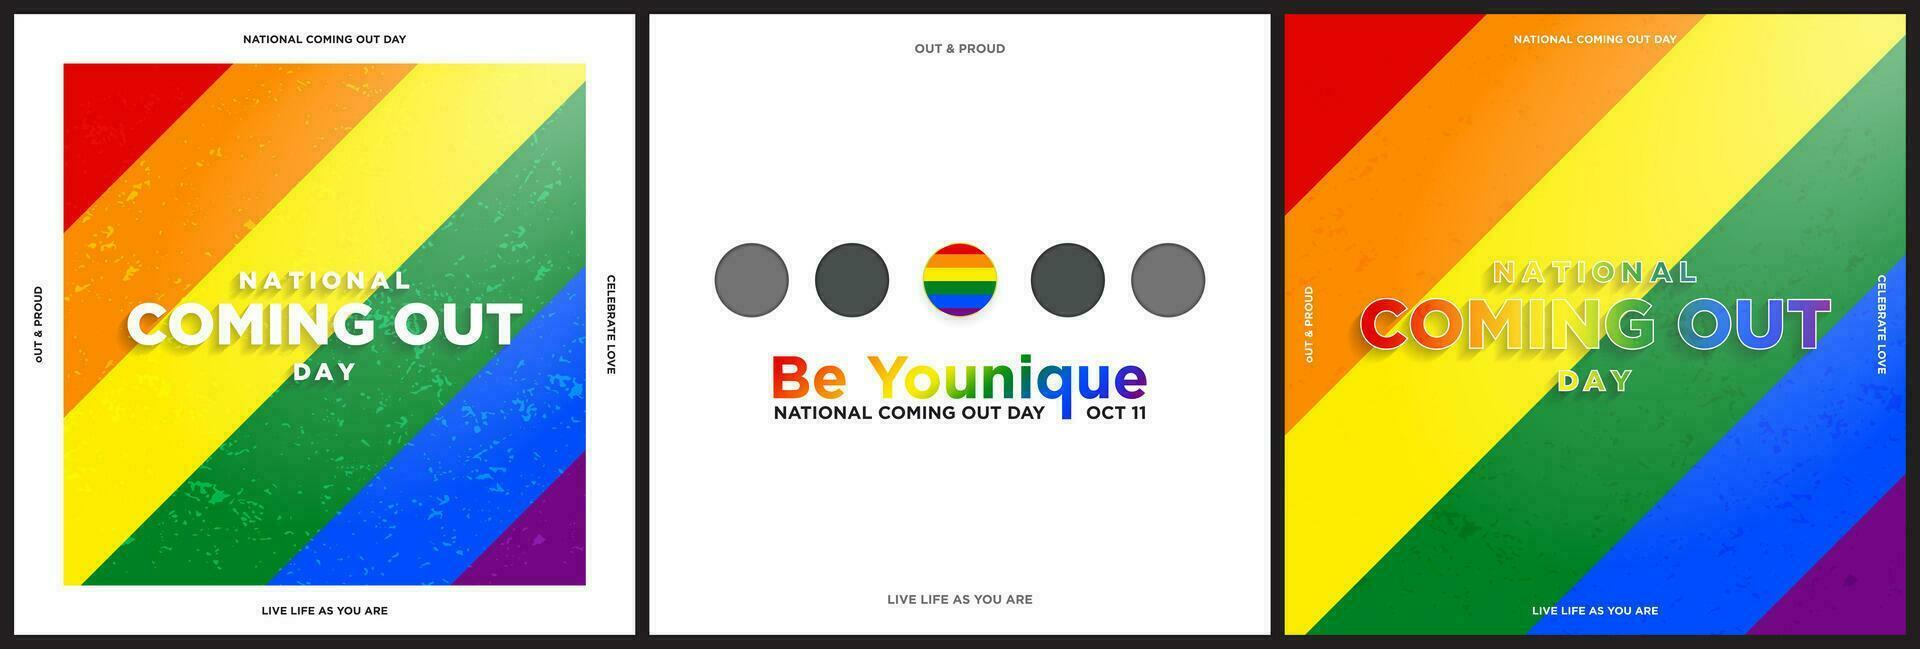 Set of National Coming Out Day Greeting Card concepts. Rainbow Pride Flag background with sunshine and lettering. Be younique. Pride Flag colors. Vector Illustration. Celebrated on October 11.